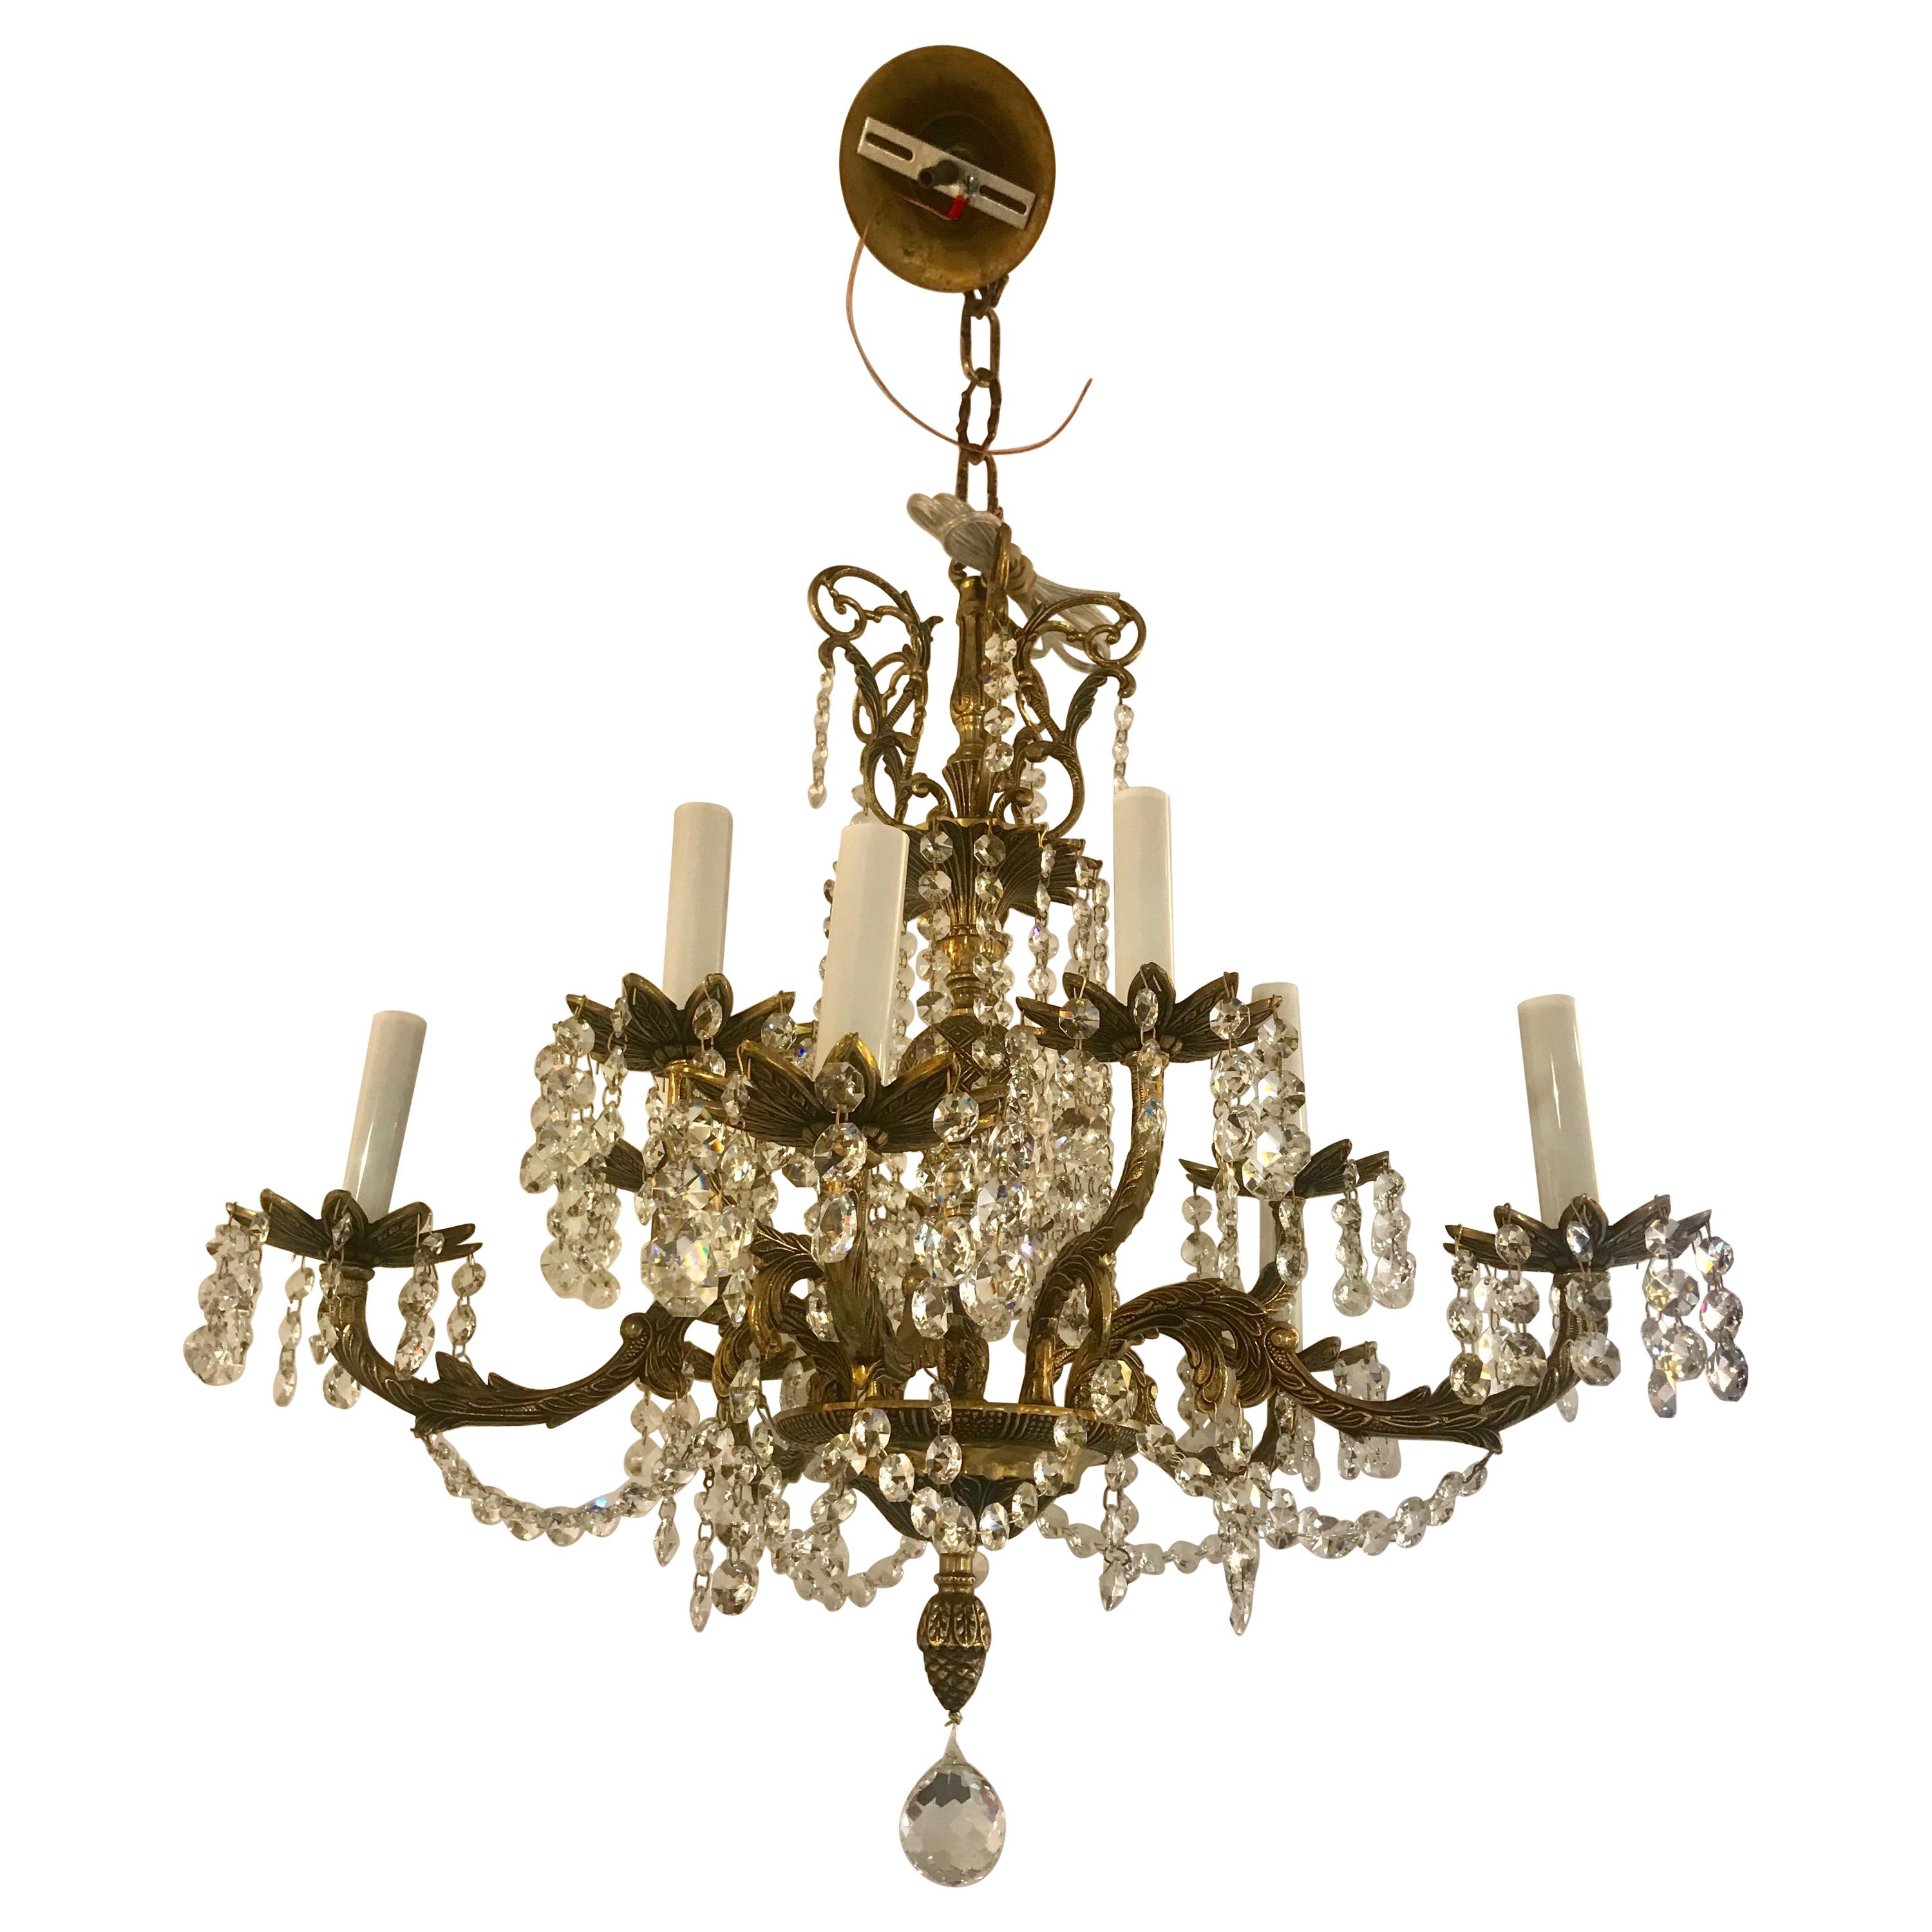 Large Romantic Vintage Spanish Brass and Crystal Chandelier